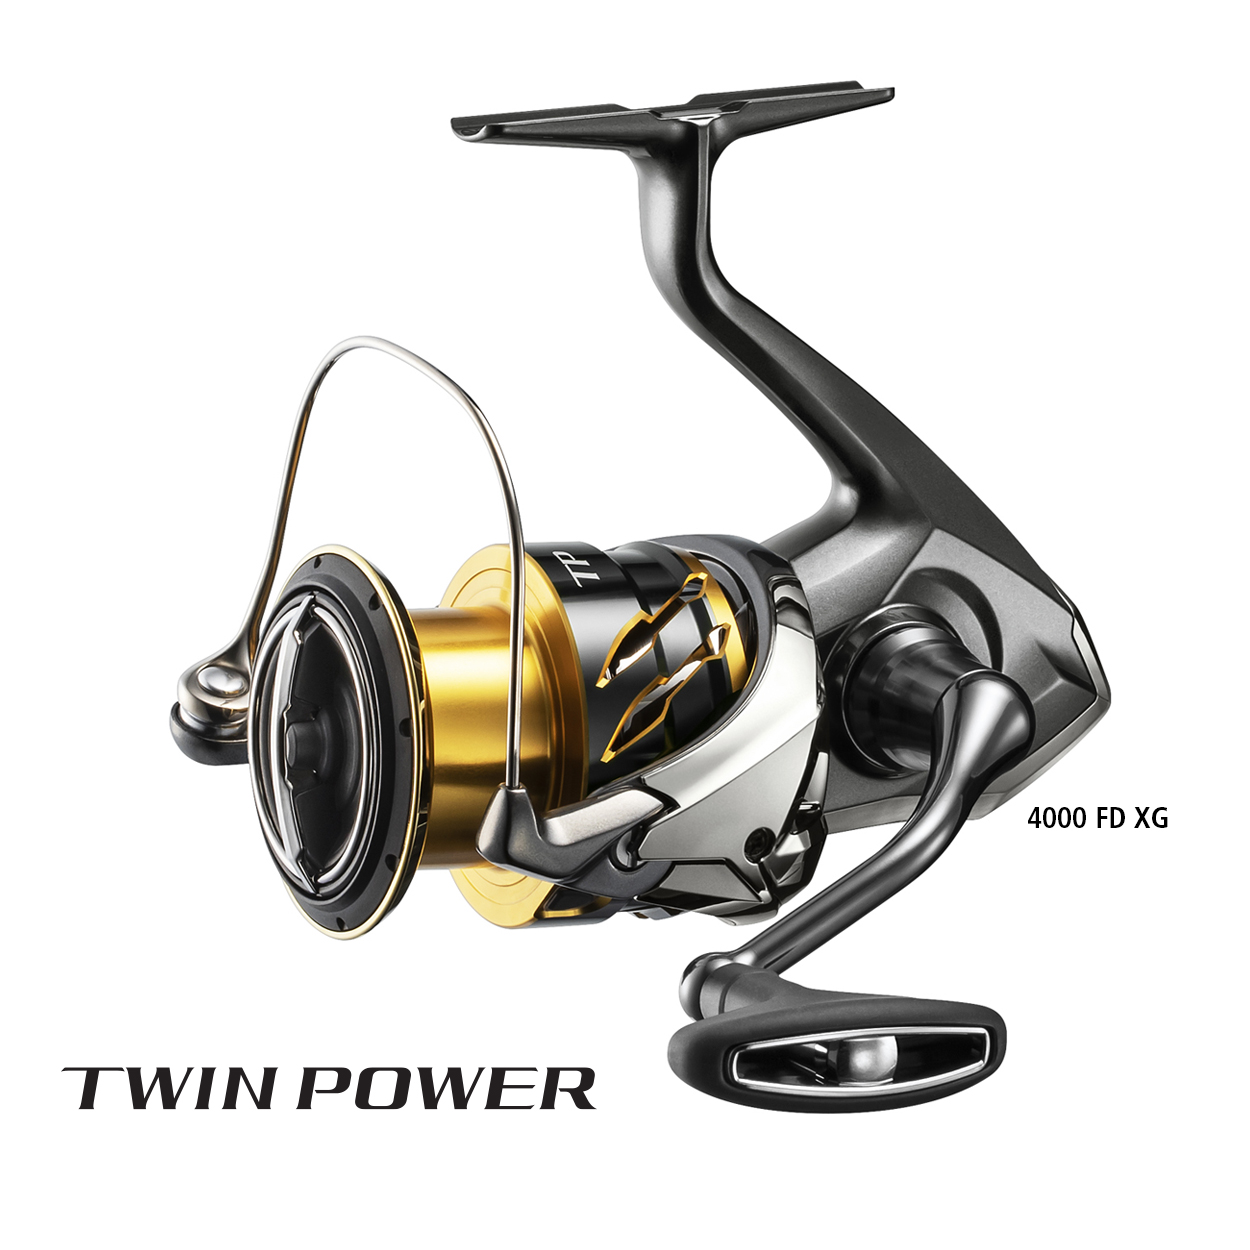 https://compleatangler.net.au/wp-content/uploads/2020/04/Compleat-Angler-Ringwood-Shimano-Twinpower-FD-Reel.jpg